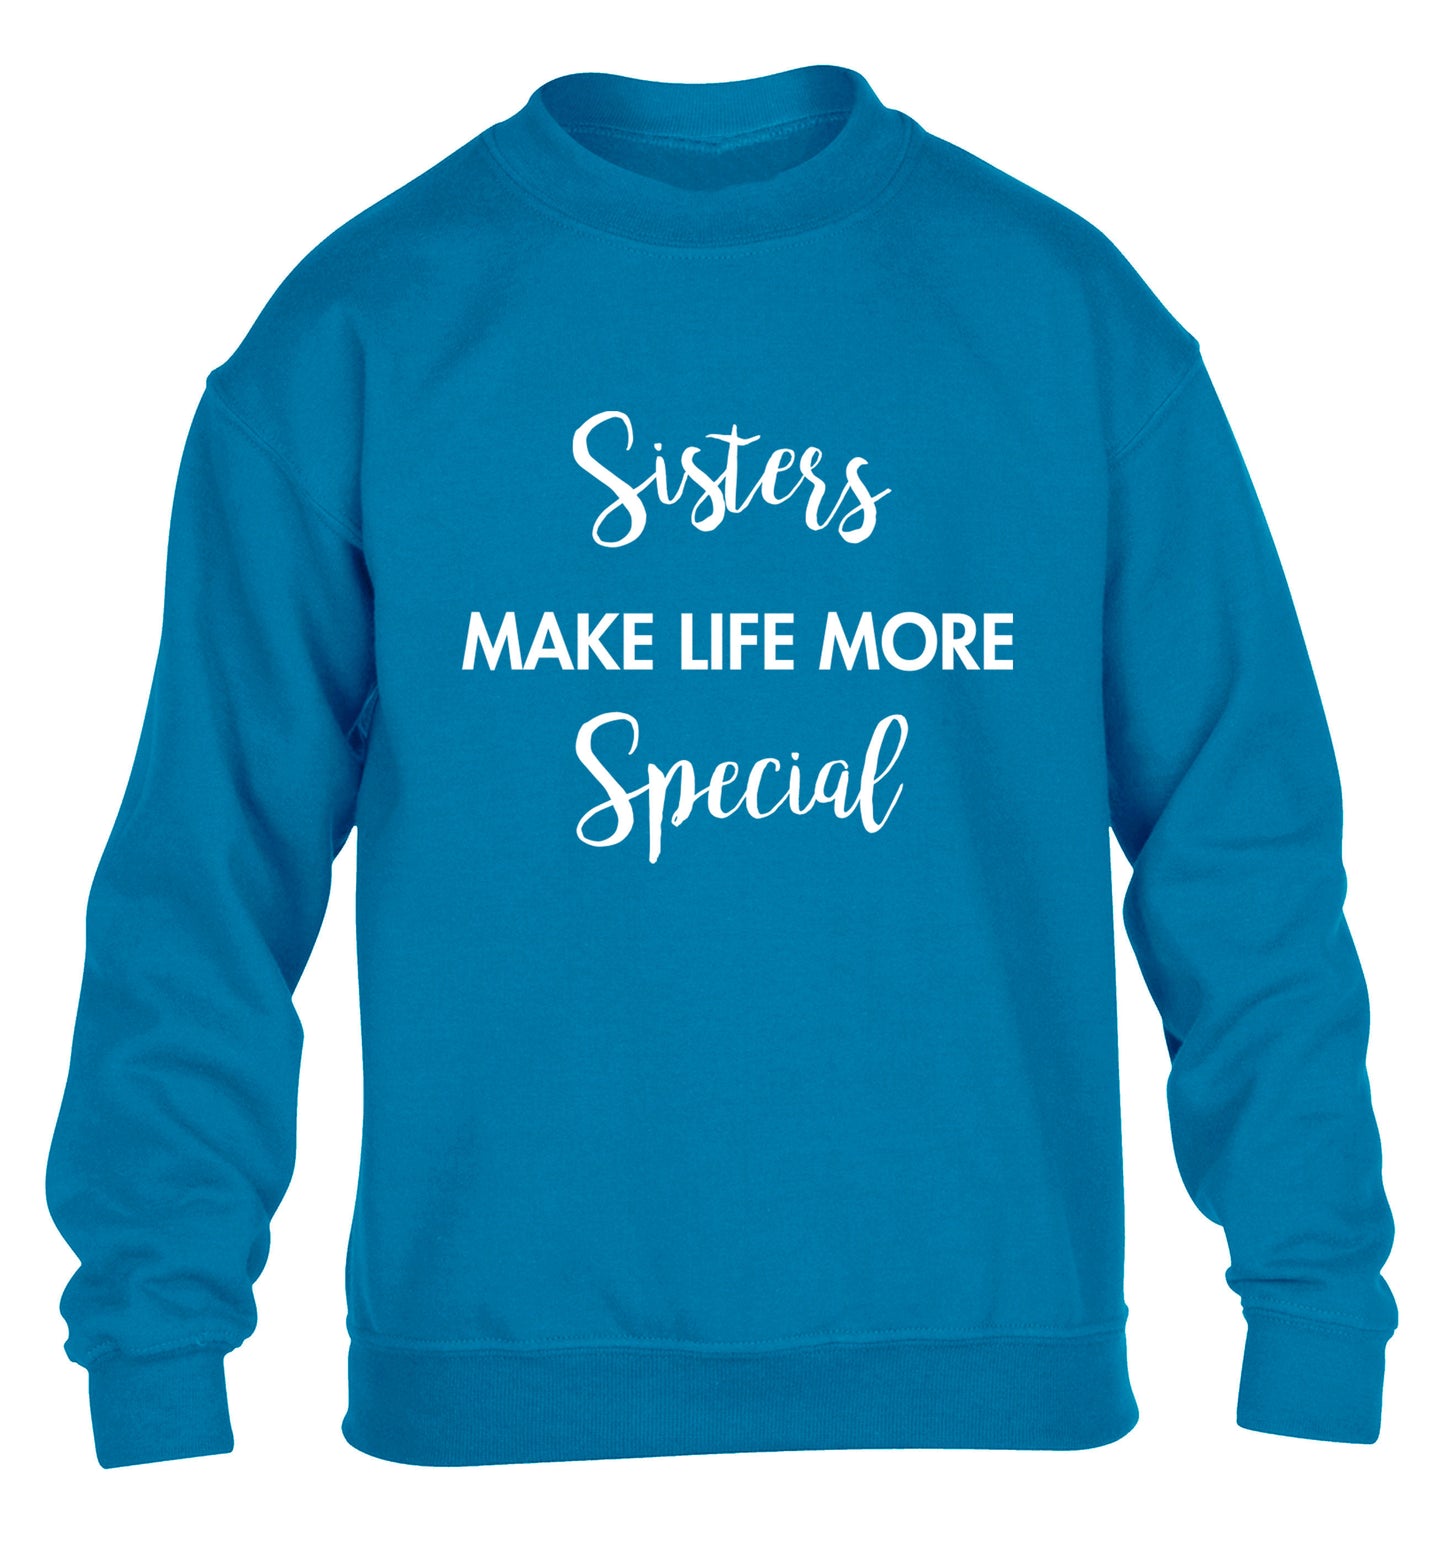 Sisters make life more special children's blue sweater 12-14 Years